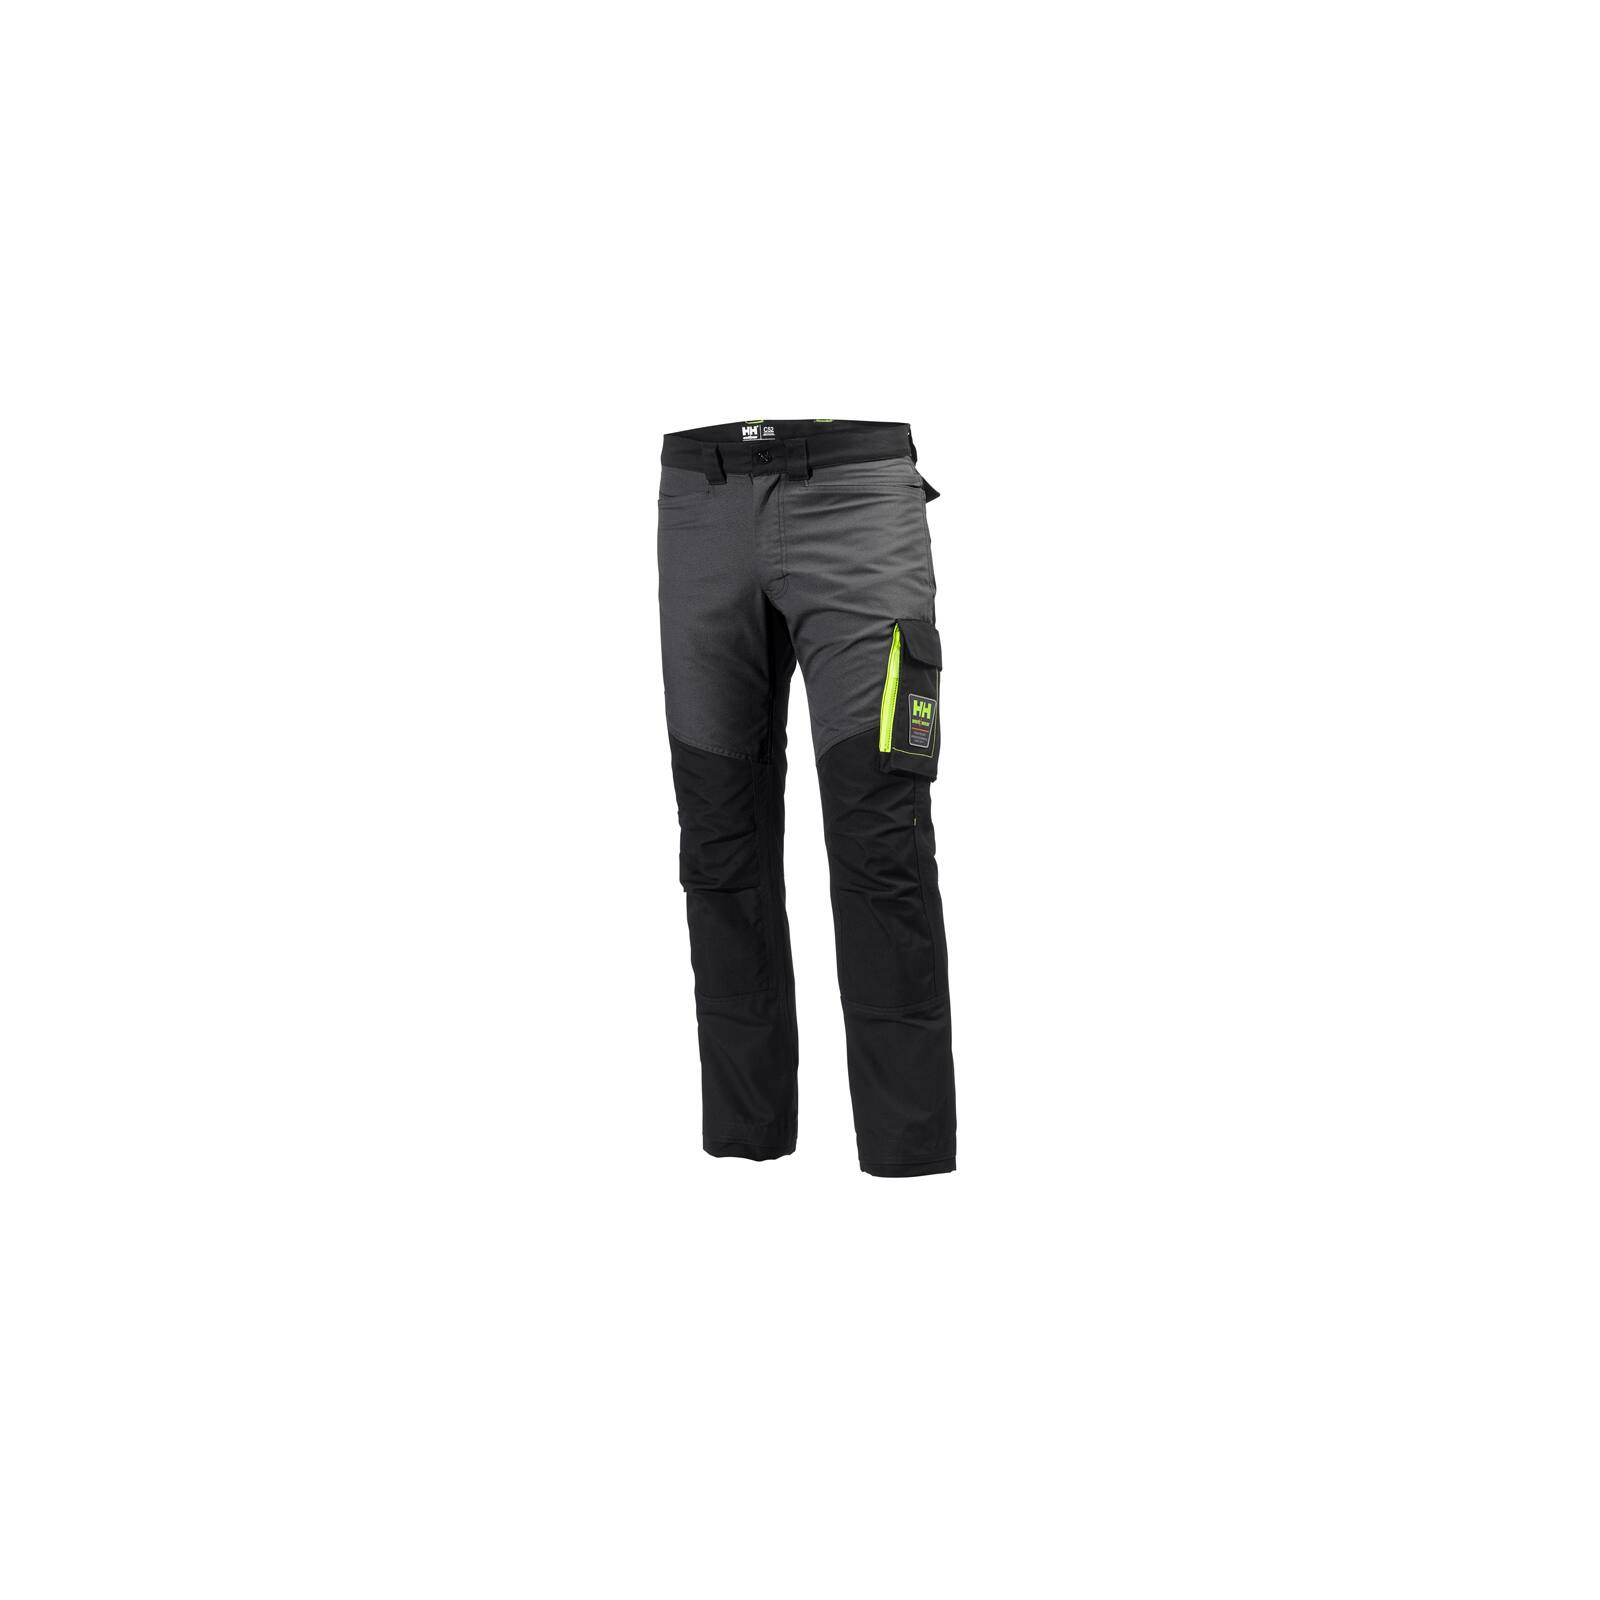 Helly Hansen Aker Work Pant - Roadieworks.com - Online shop for workw ...